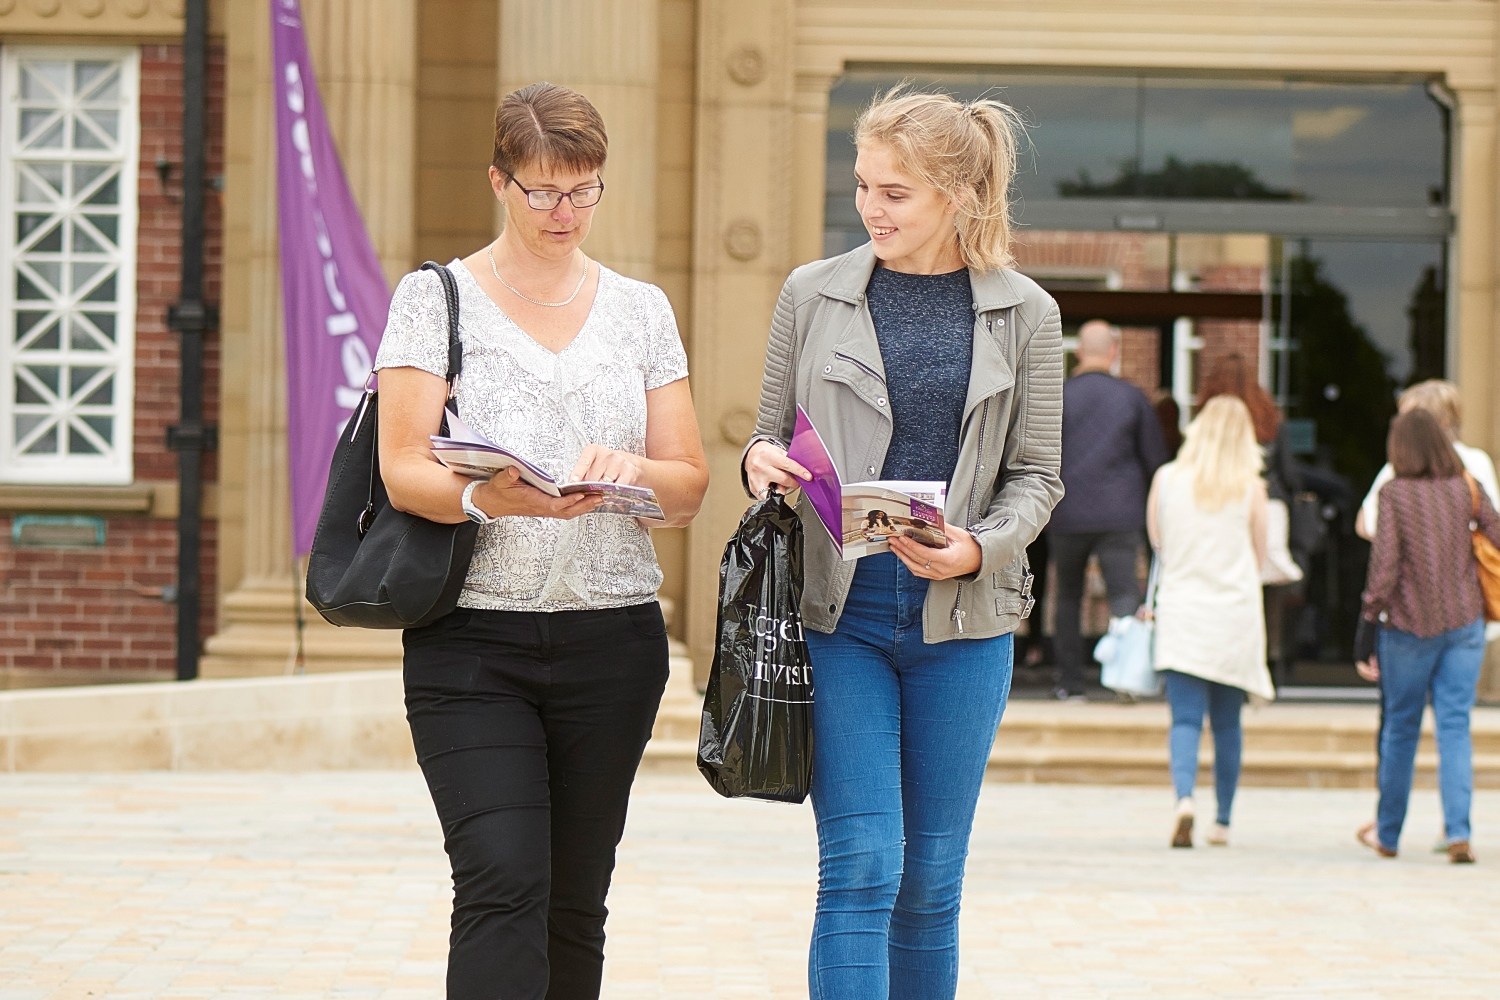 A student and their mum consult a printed open day guide while walking near the Main Building during an open day.